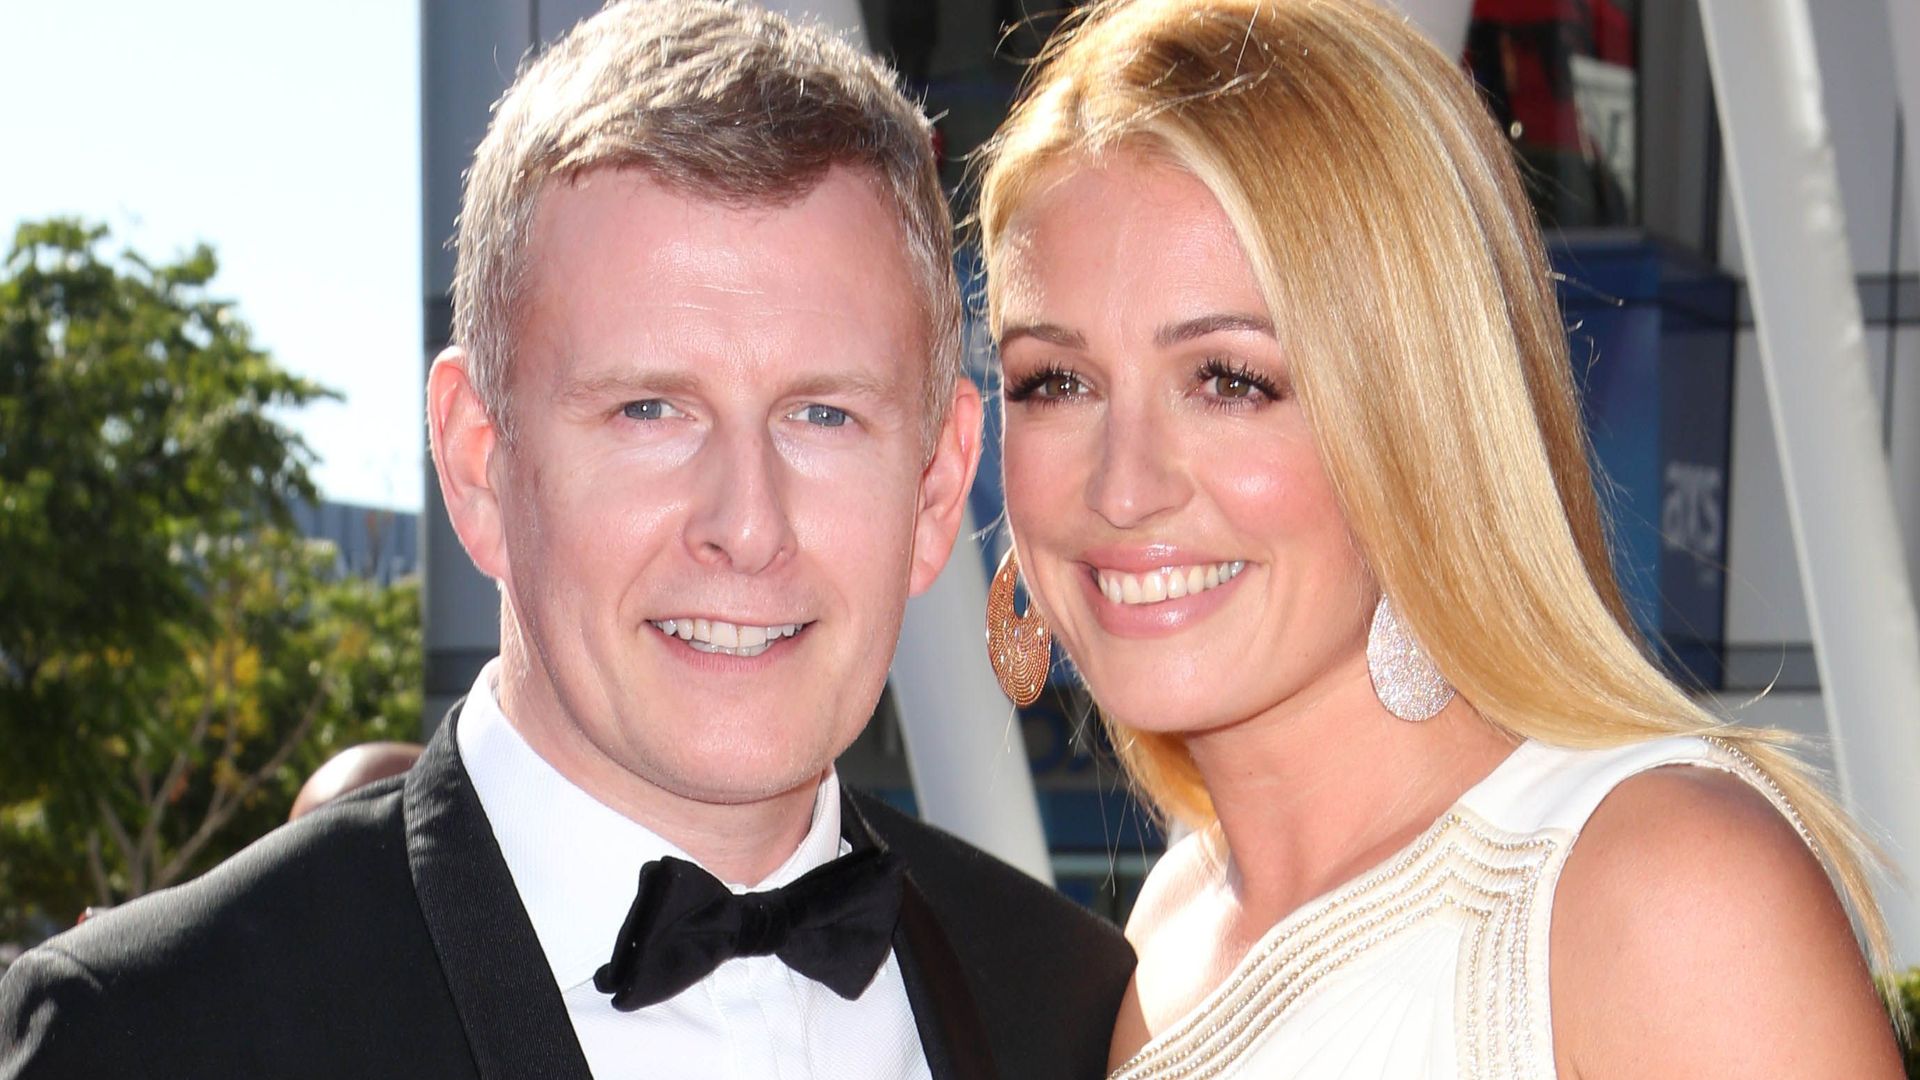 Cat Deeley in a white dress with her husband Patrick Kielty